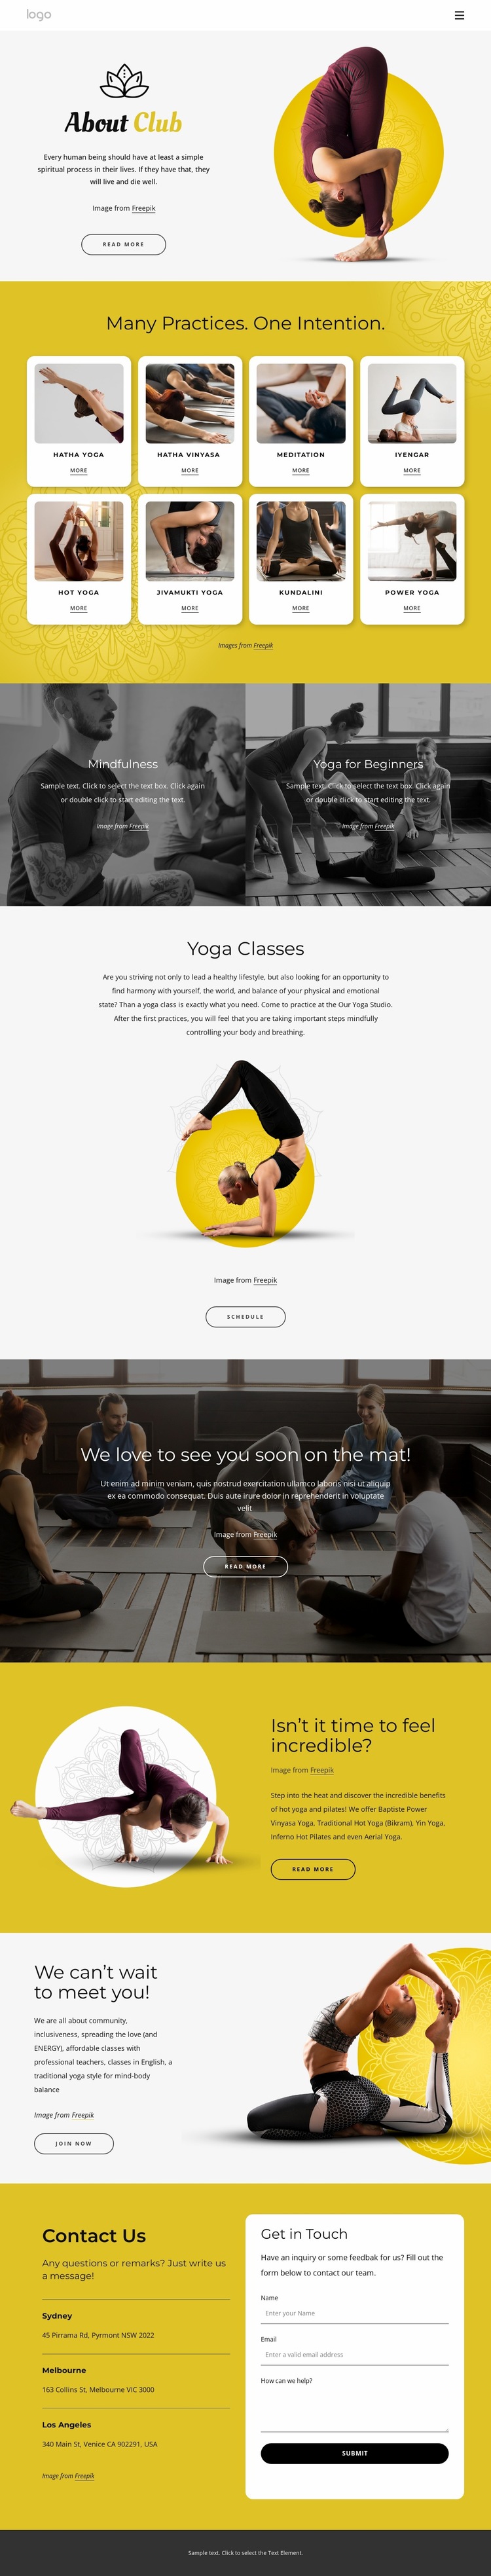 Physical, ethical and spiritual practice Website Builder Templates